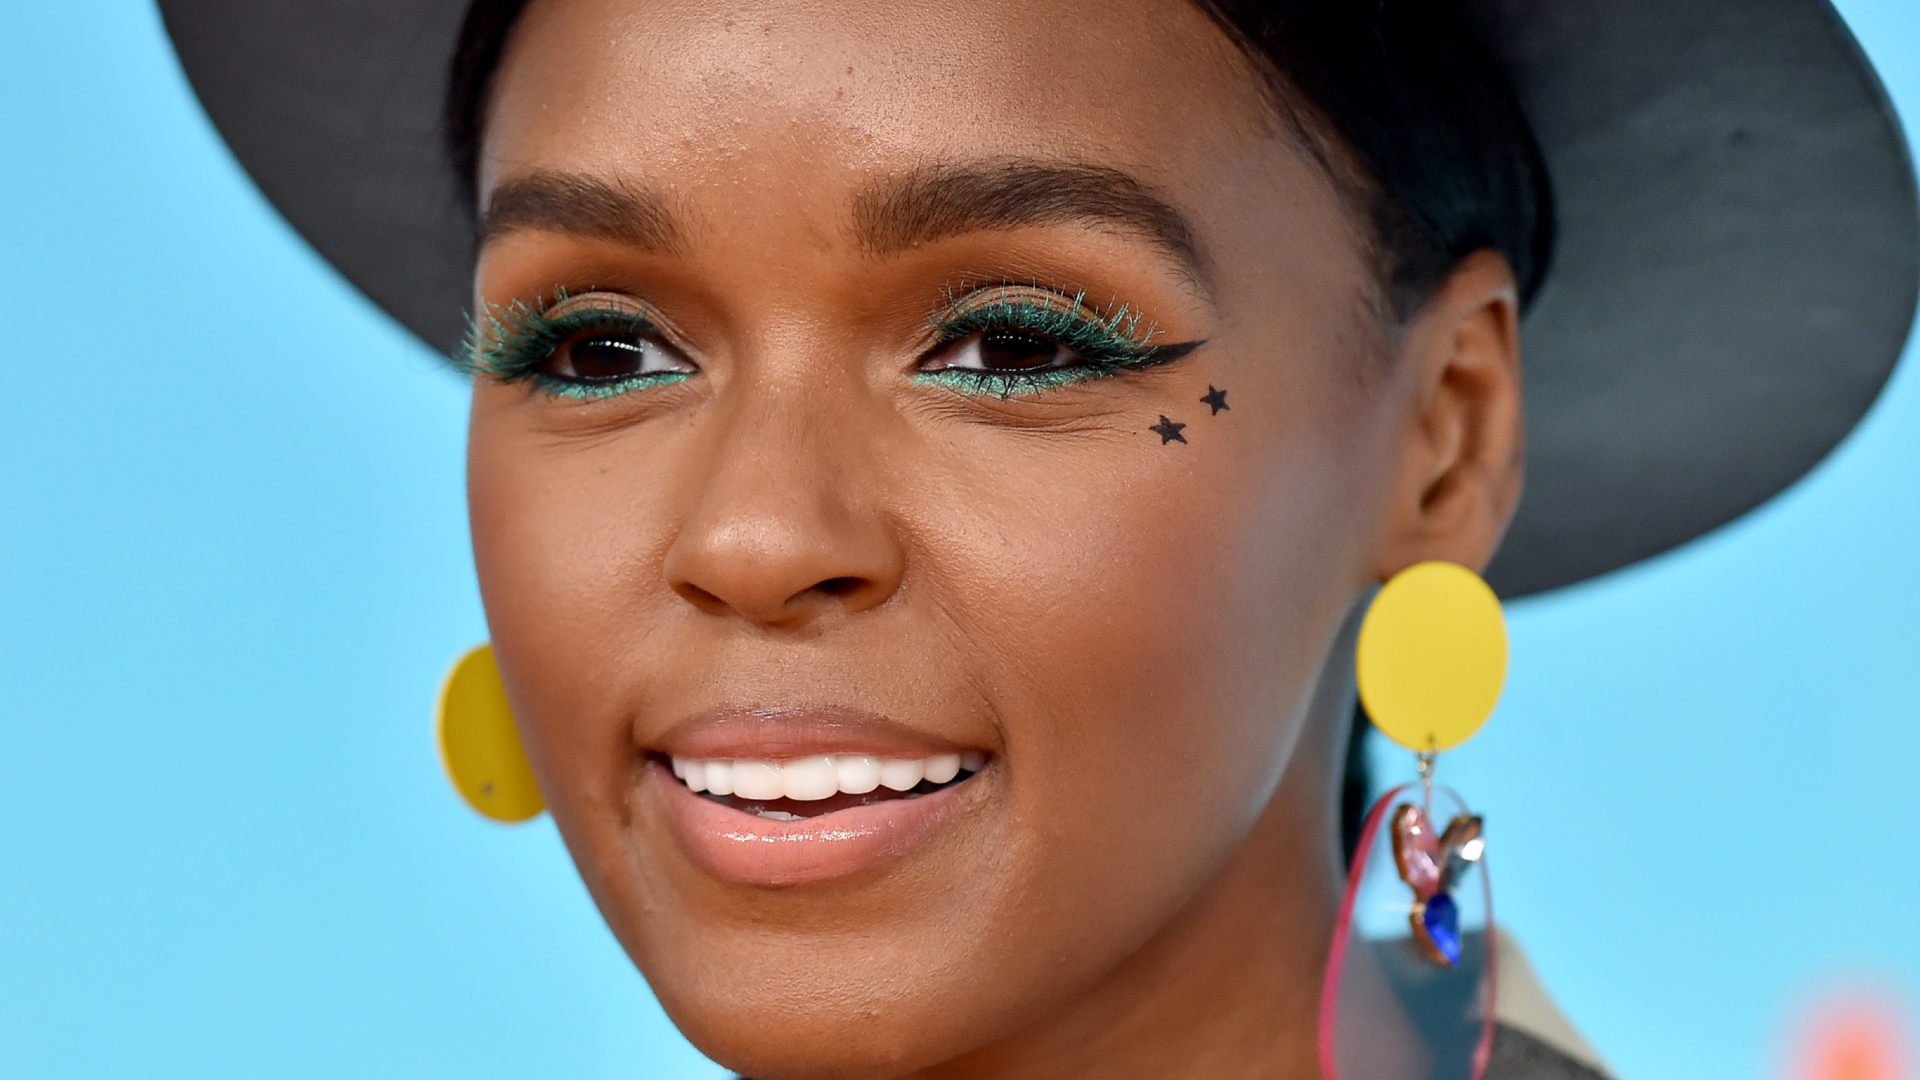 20 Pretty Makeup Looks To With Your Face Mask |